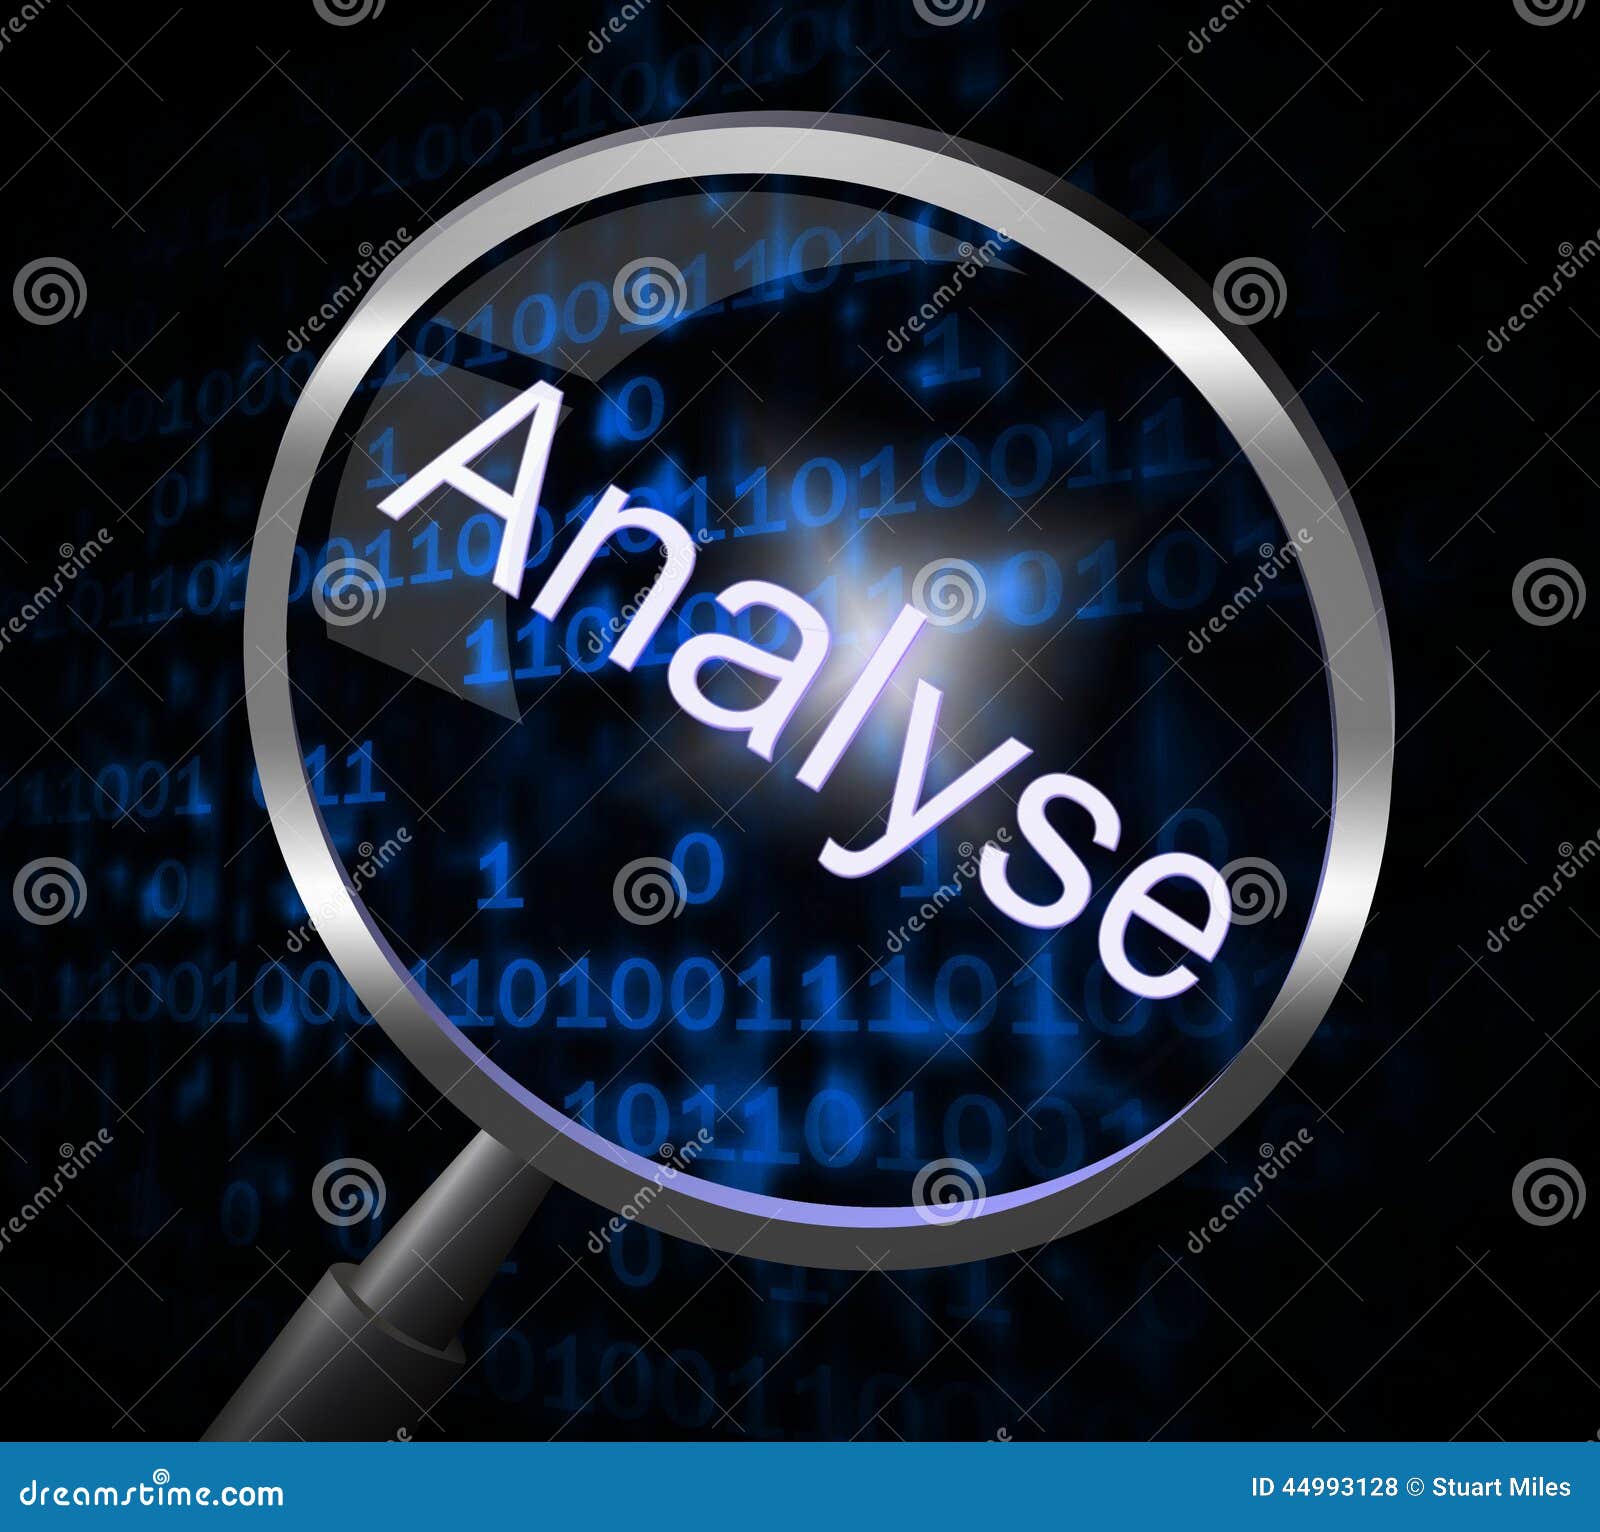 Free Stock Photo of Analysis Magnifier Represents Data Analytics And Analyse